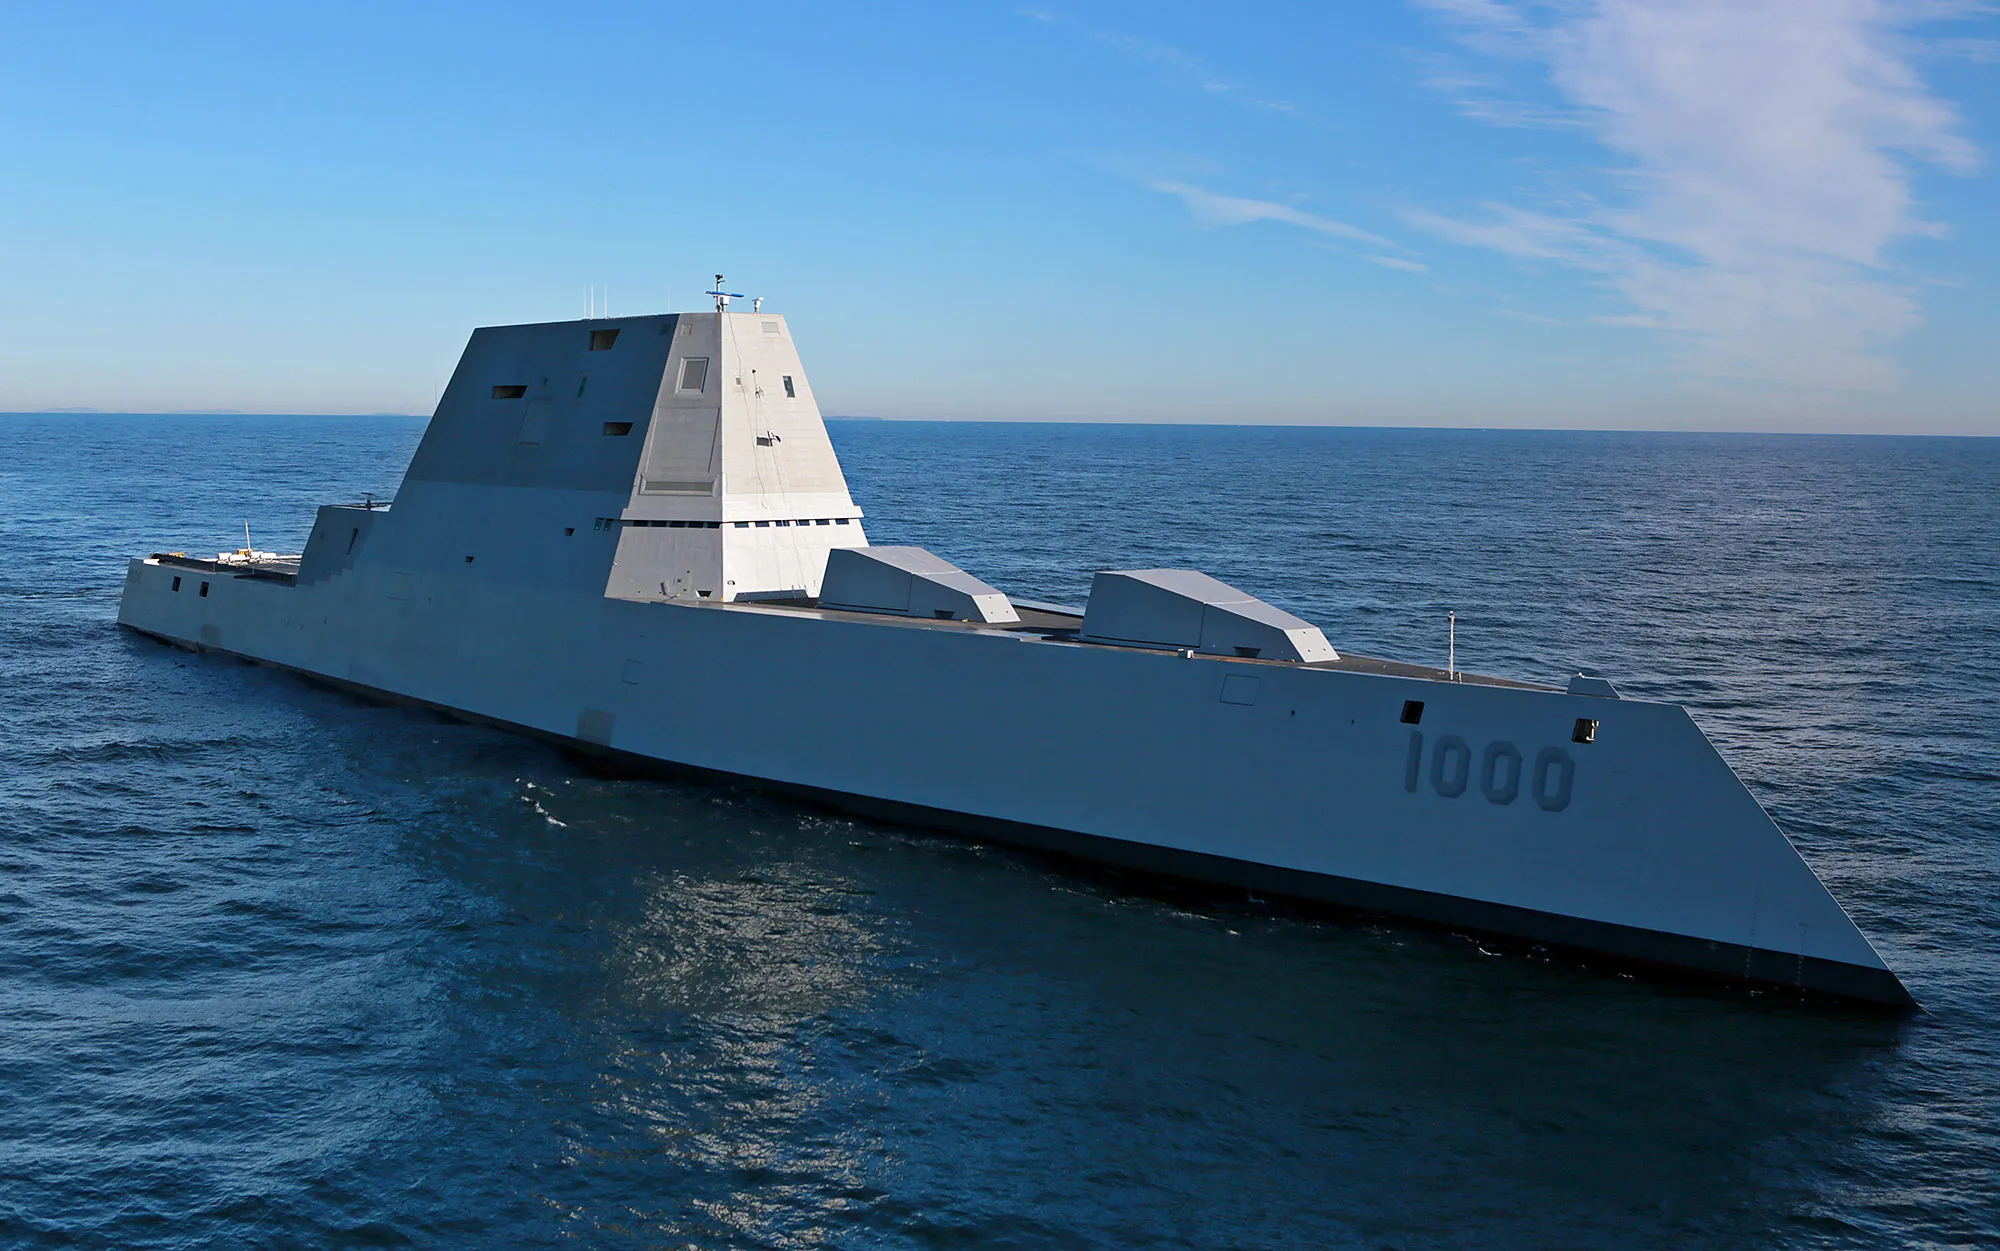 Lockheed Martin received $1.2bn to supply and integrate hypersonic missiles into the latest Zumwalt destroyer